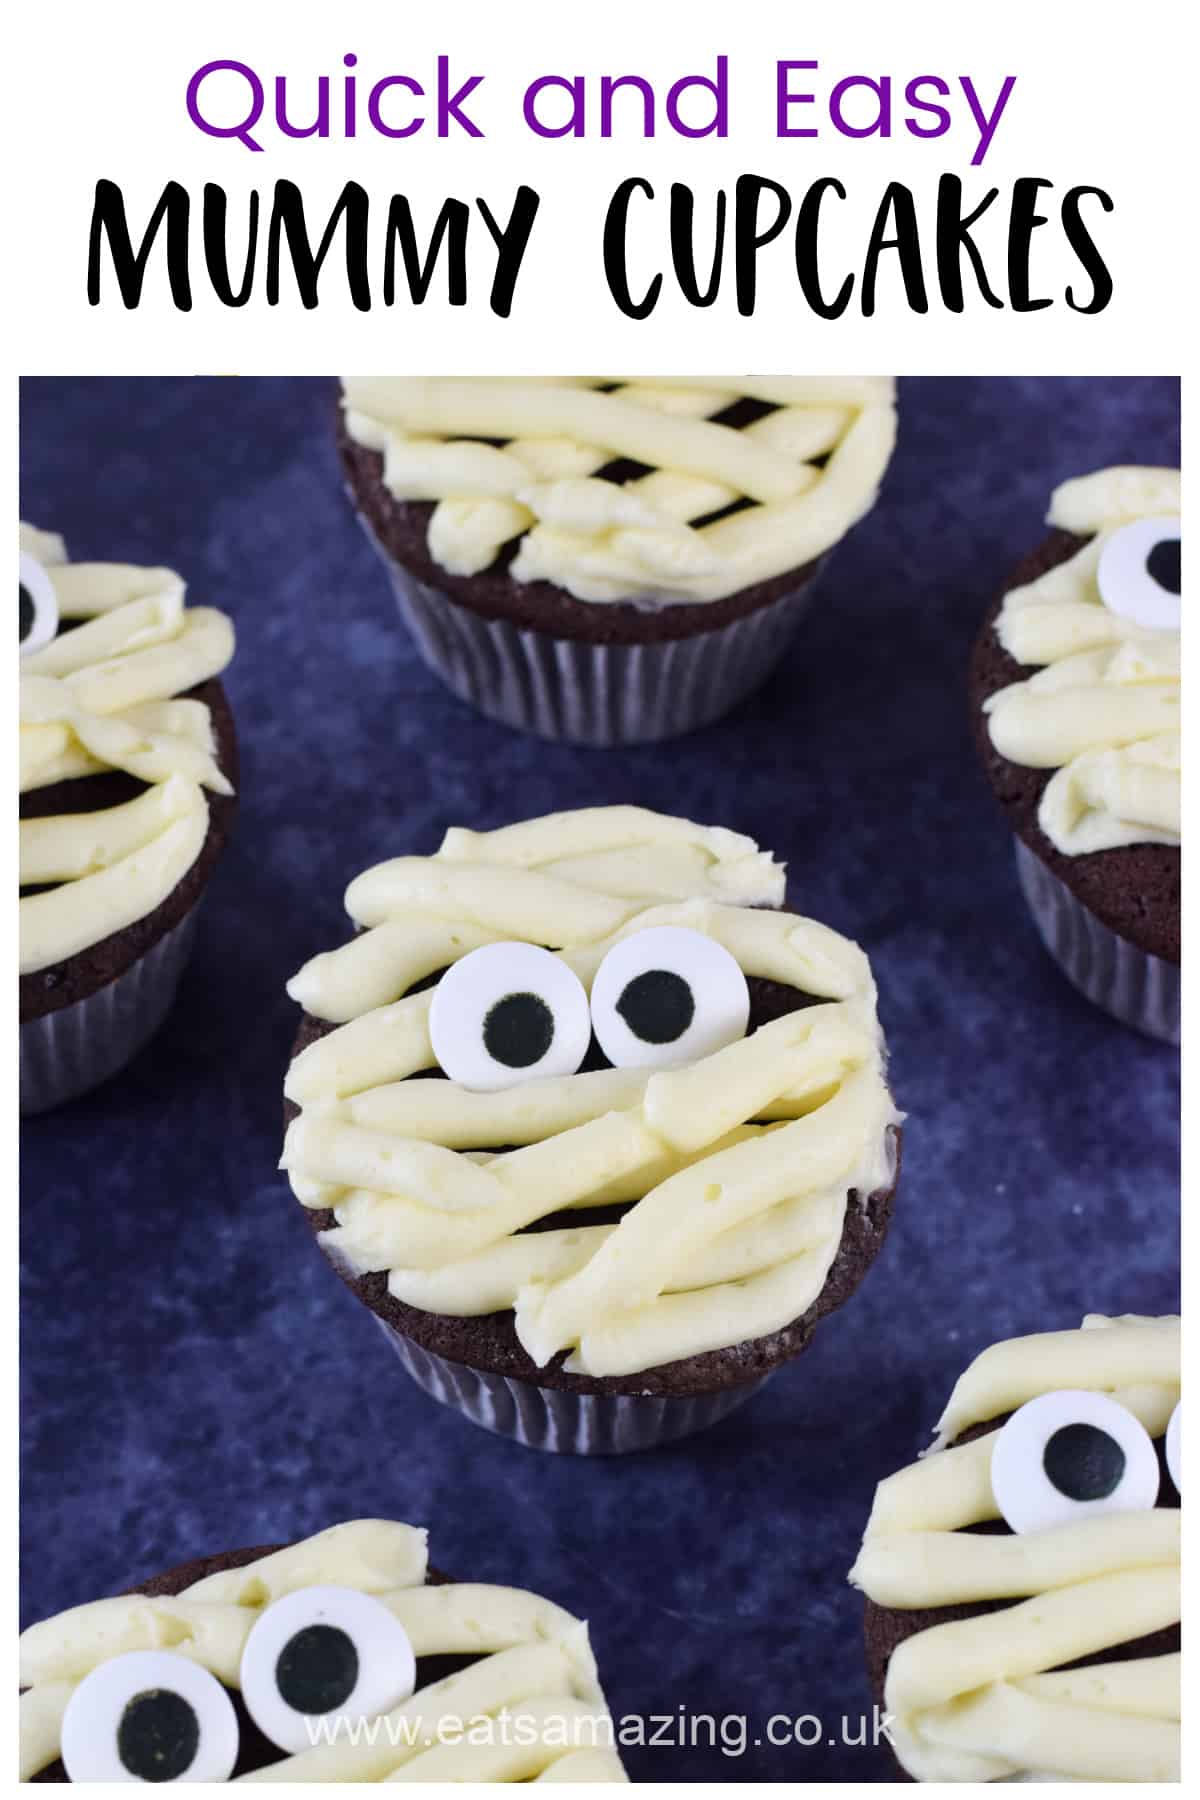 How to make quick and easy Mummy cupcakes recipe - Halloween party food for kids